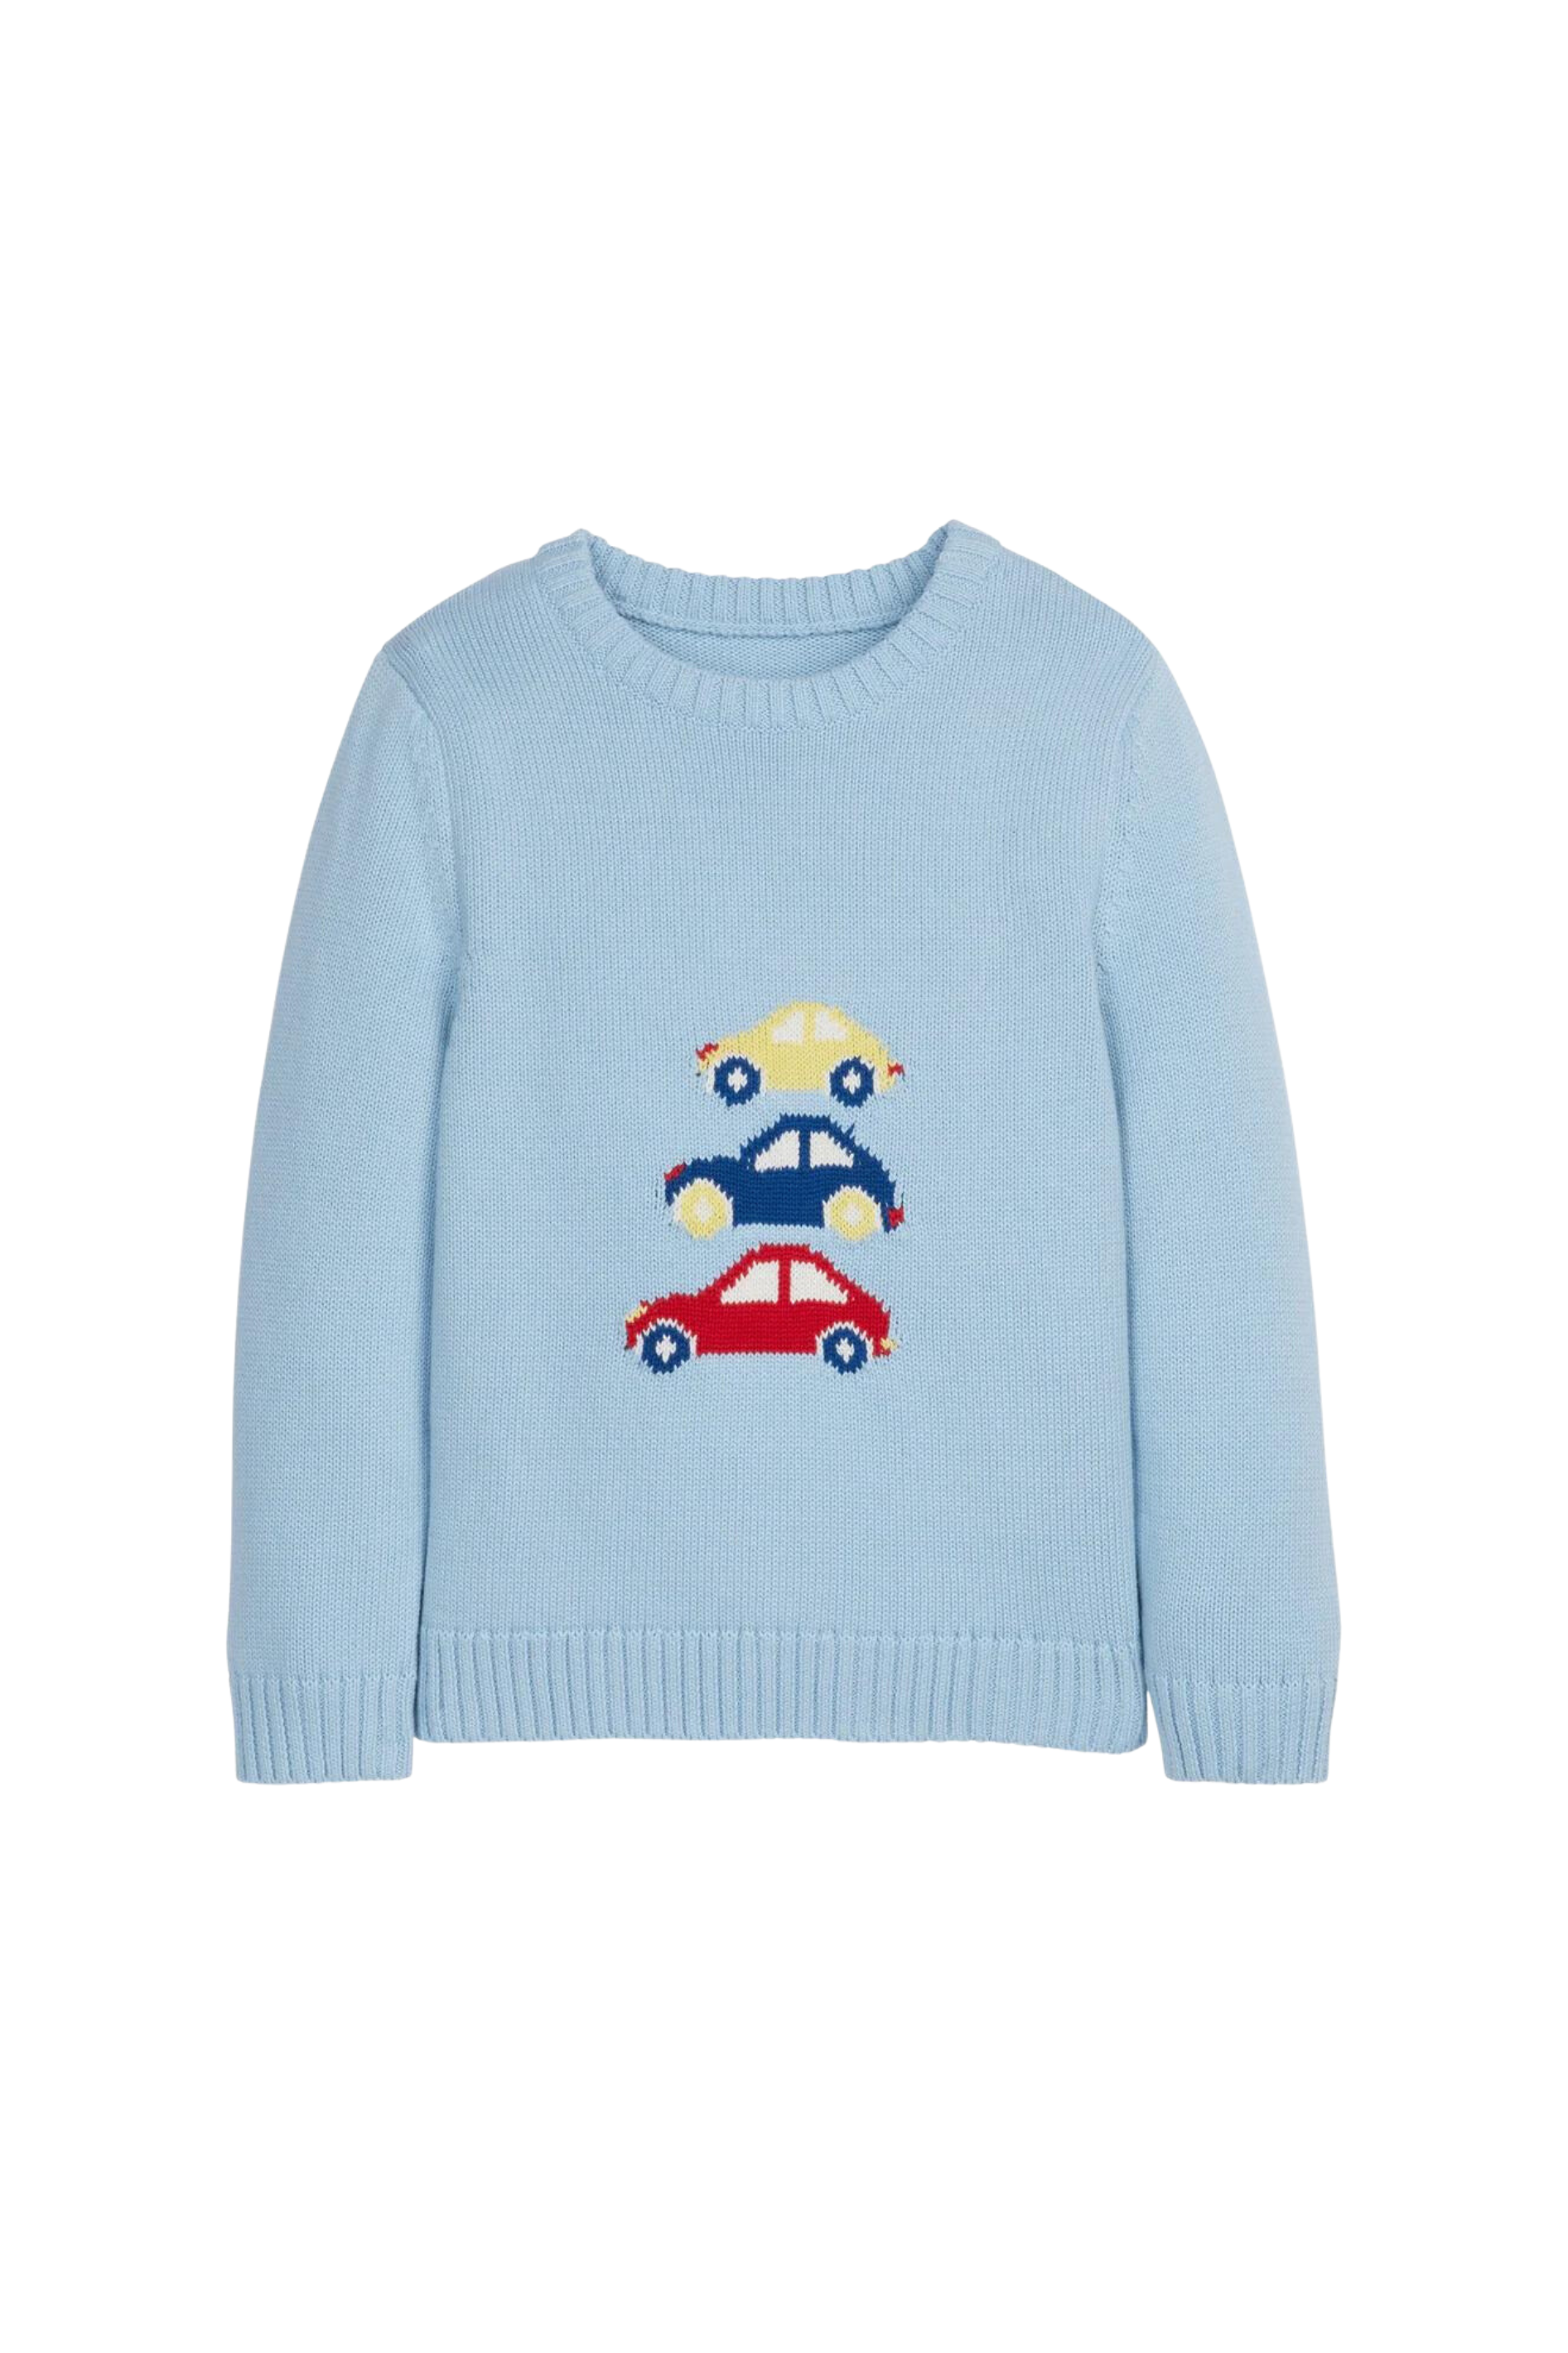 Little English | Intarsia Sweater - Stacked Cars 4T